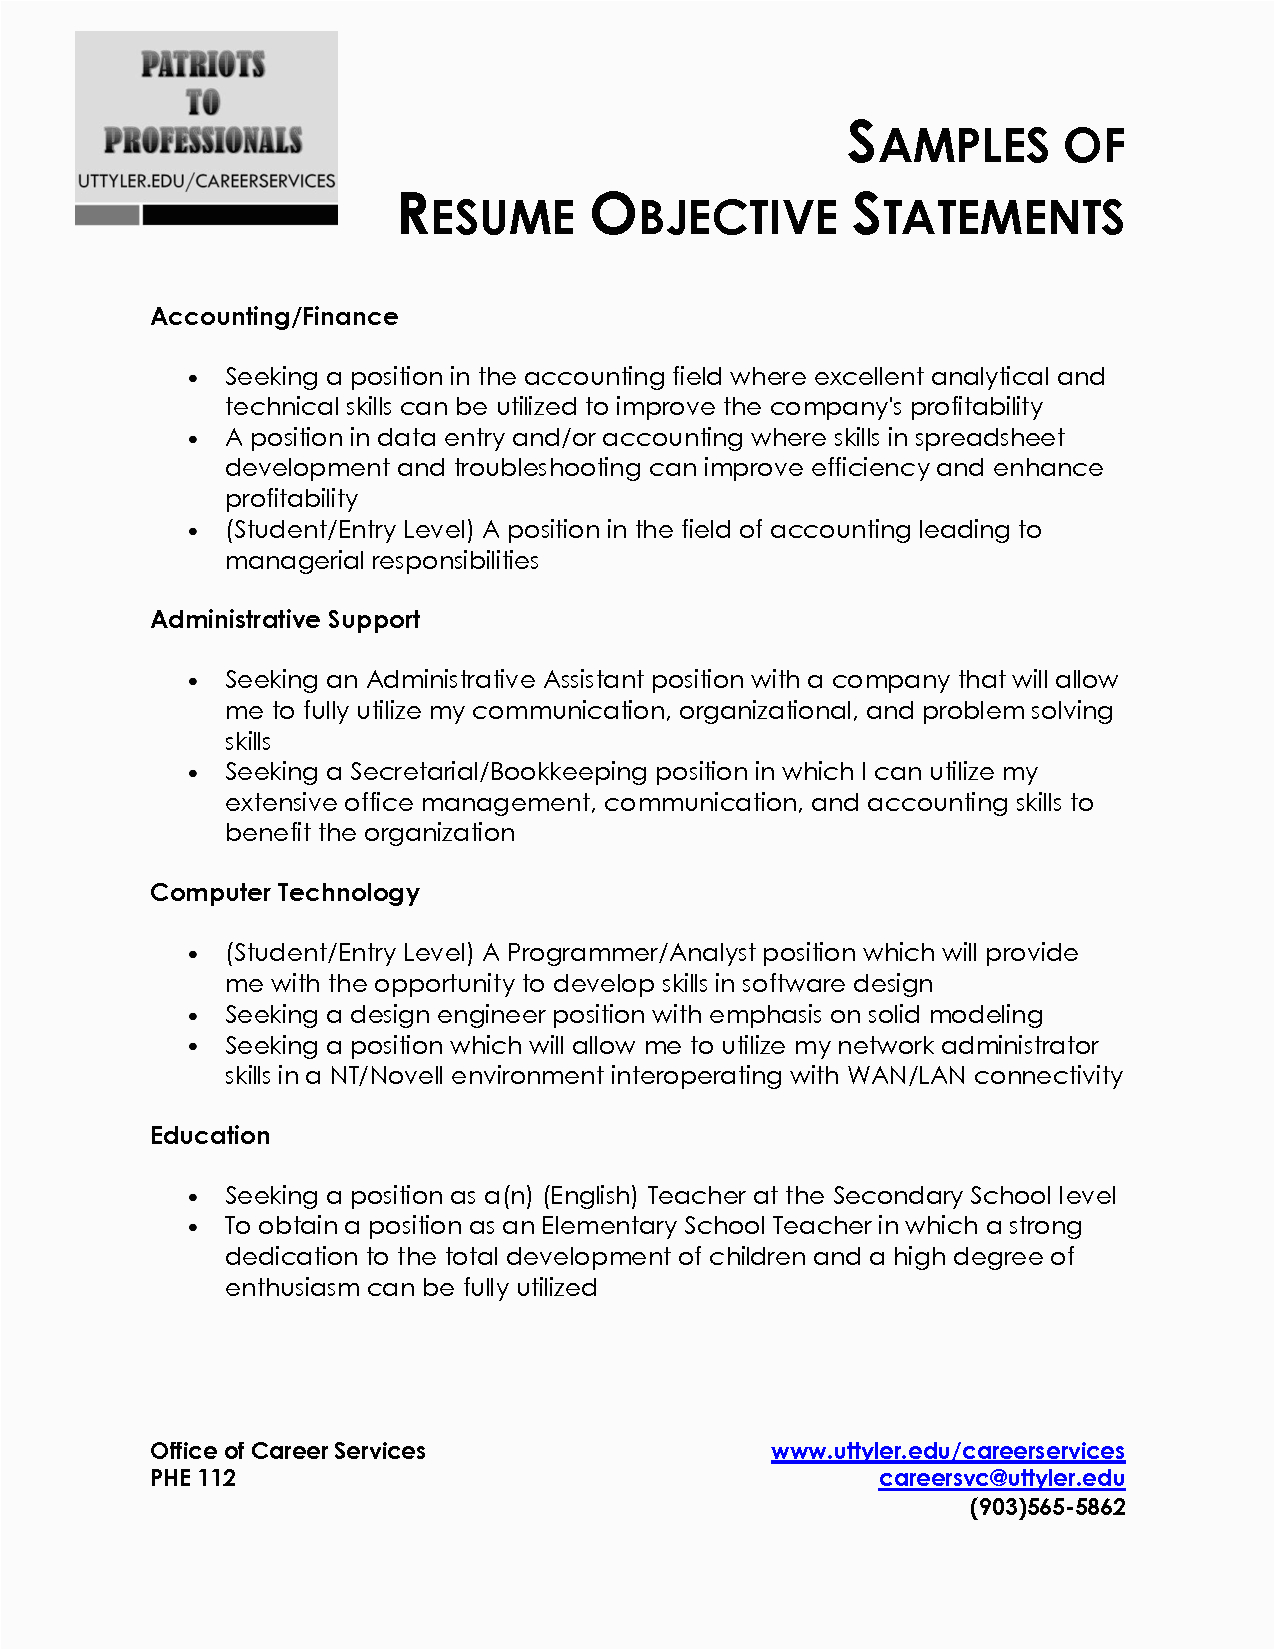 Sample Career Objectives Examples for Resumes Resume Objective Statement